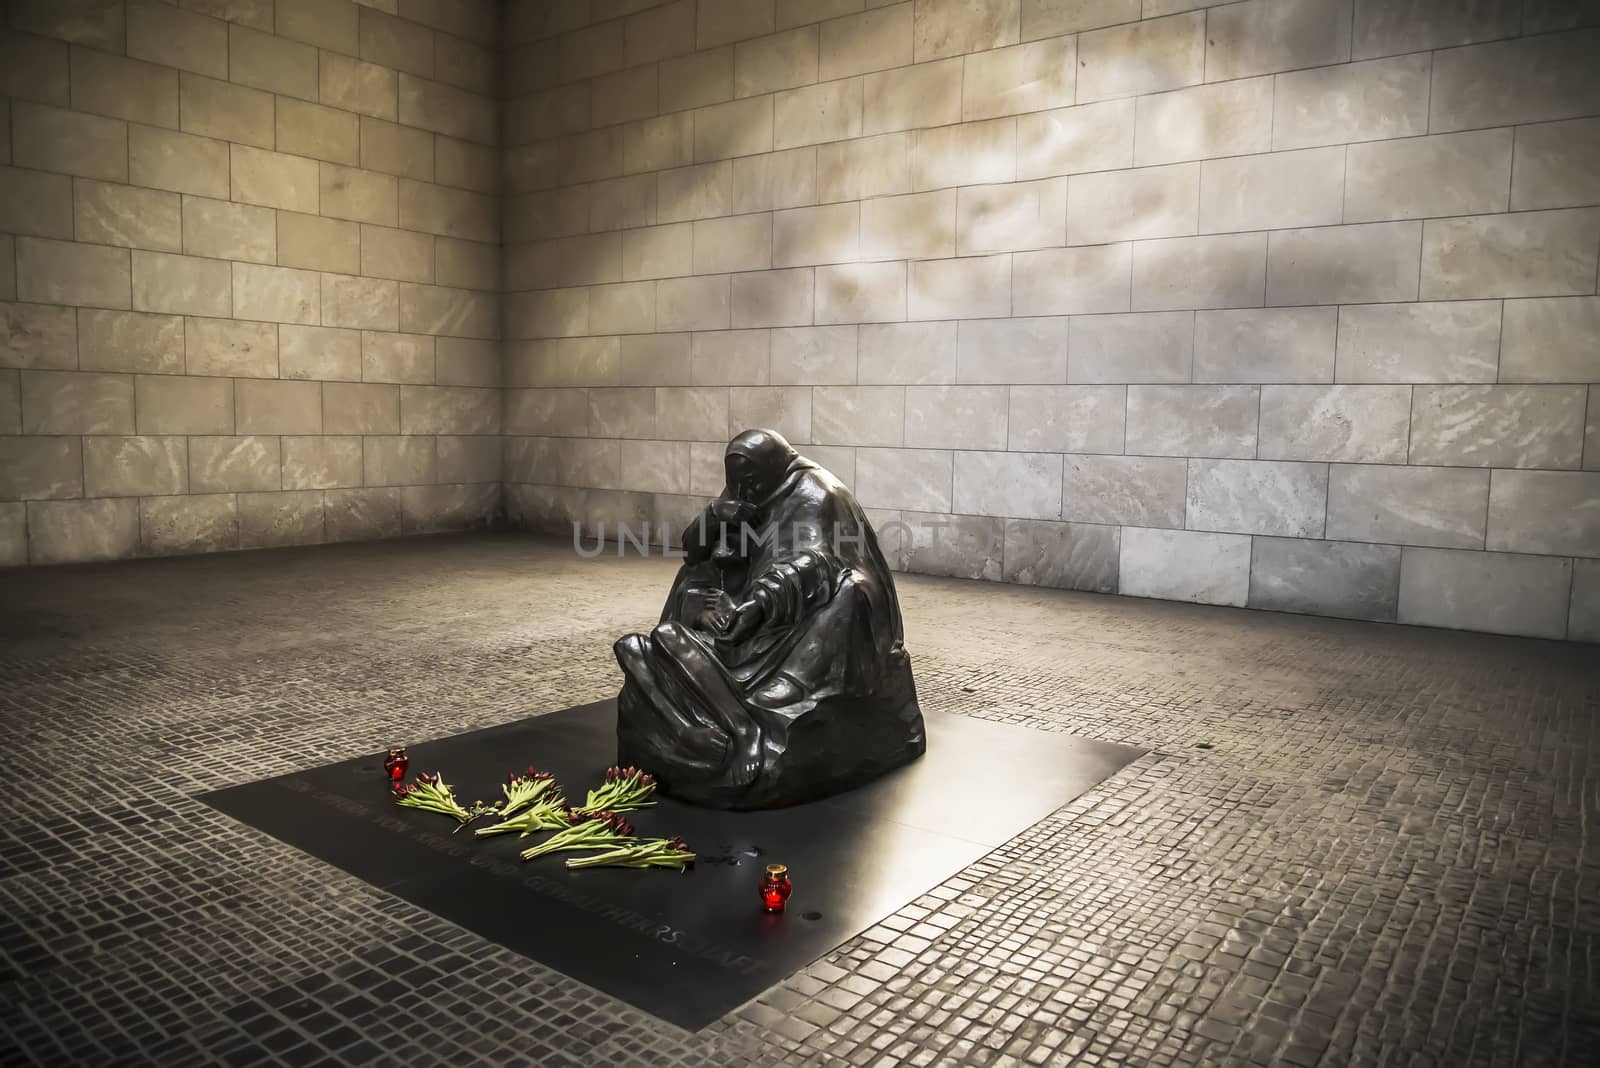 Statue of the unkonwn soldier inside the memorial in Berlin, Germany